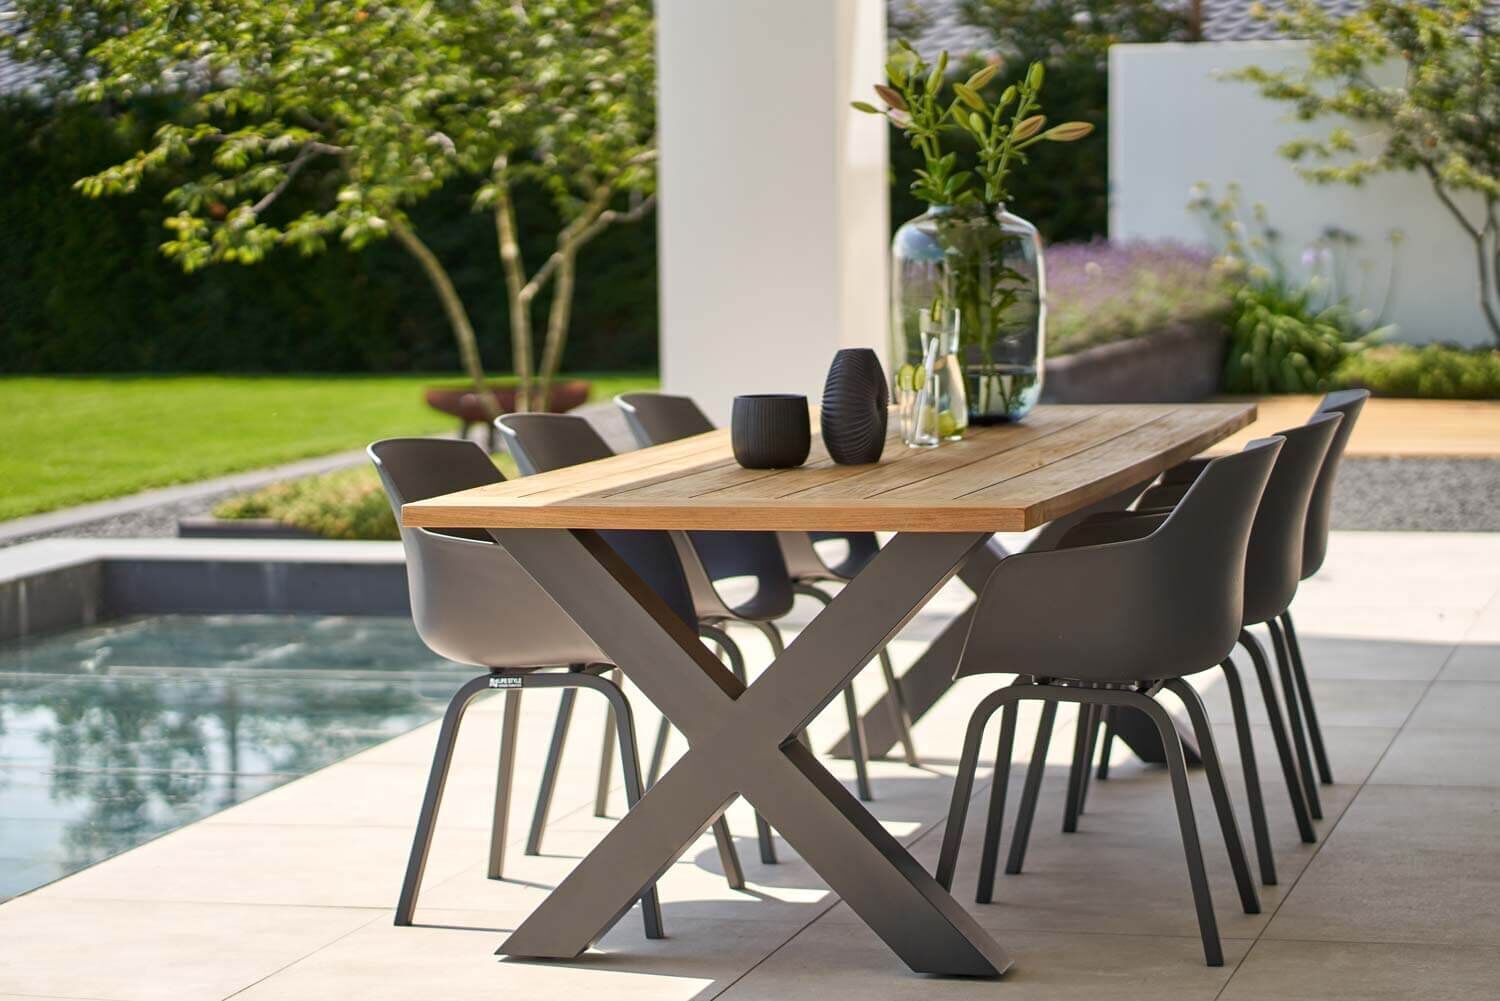 eiland systeem Brutaal Lifestyle Salina/Fabriano 150 cm dining tuinset 7-delig - Tuinmeubelshop.nl